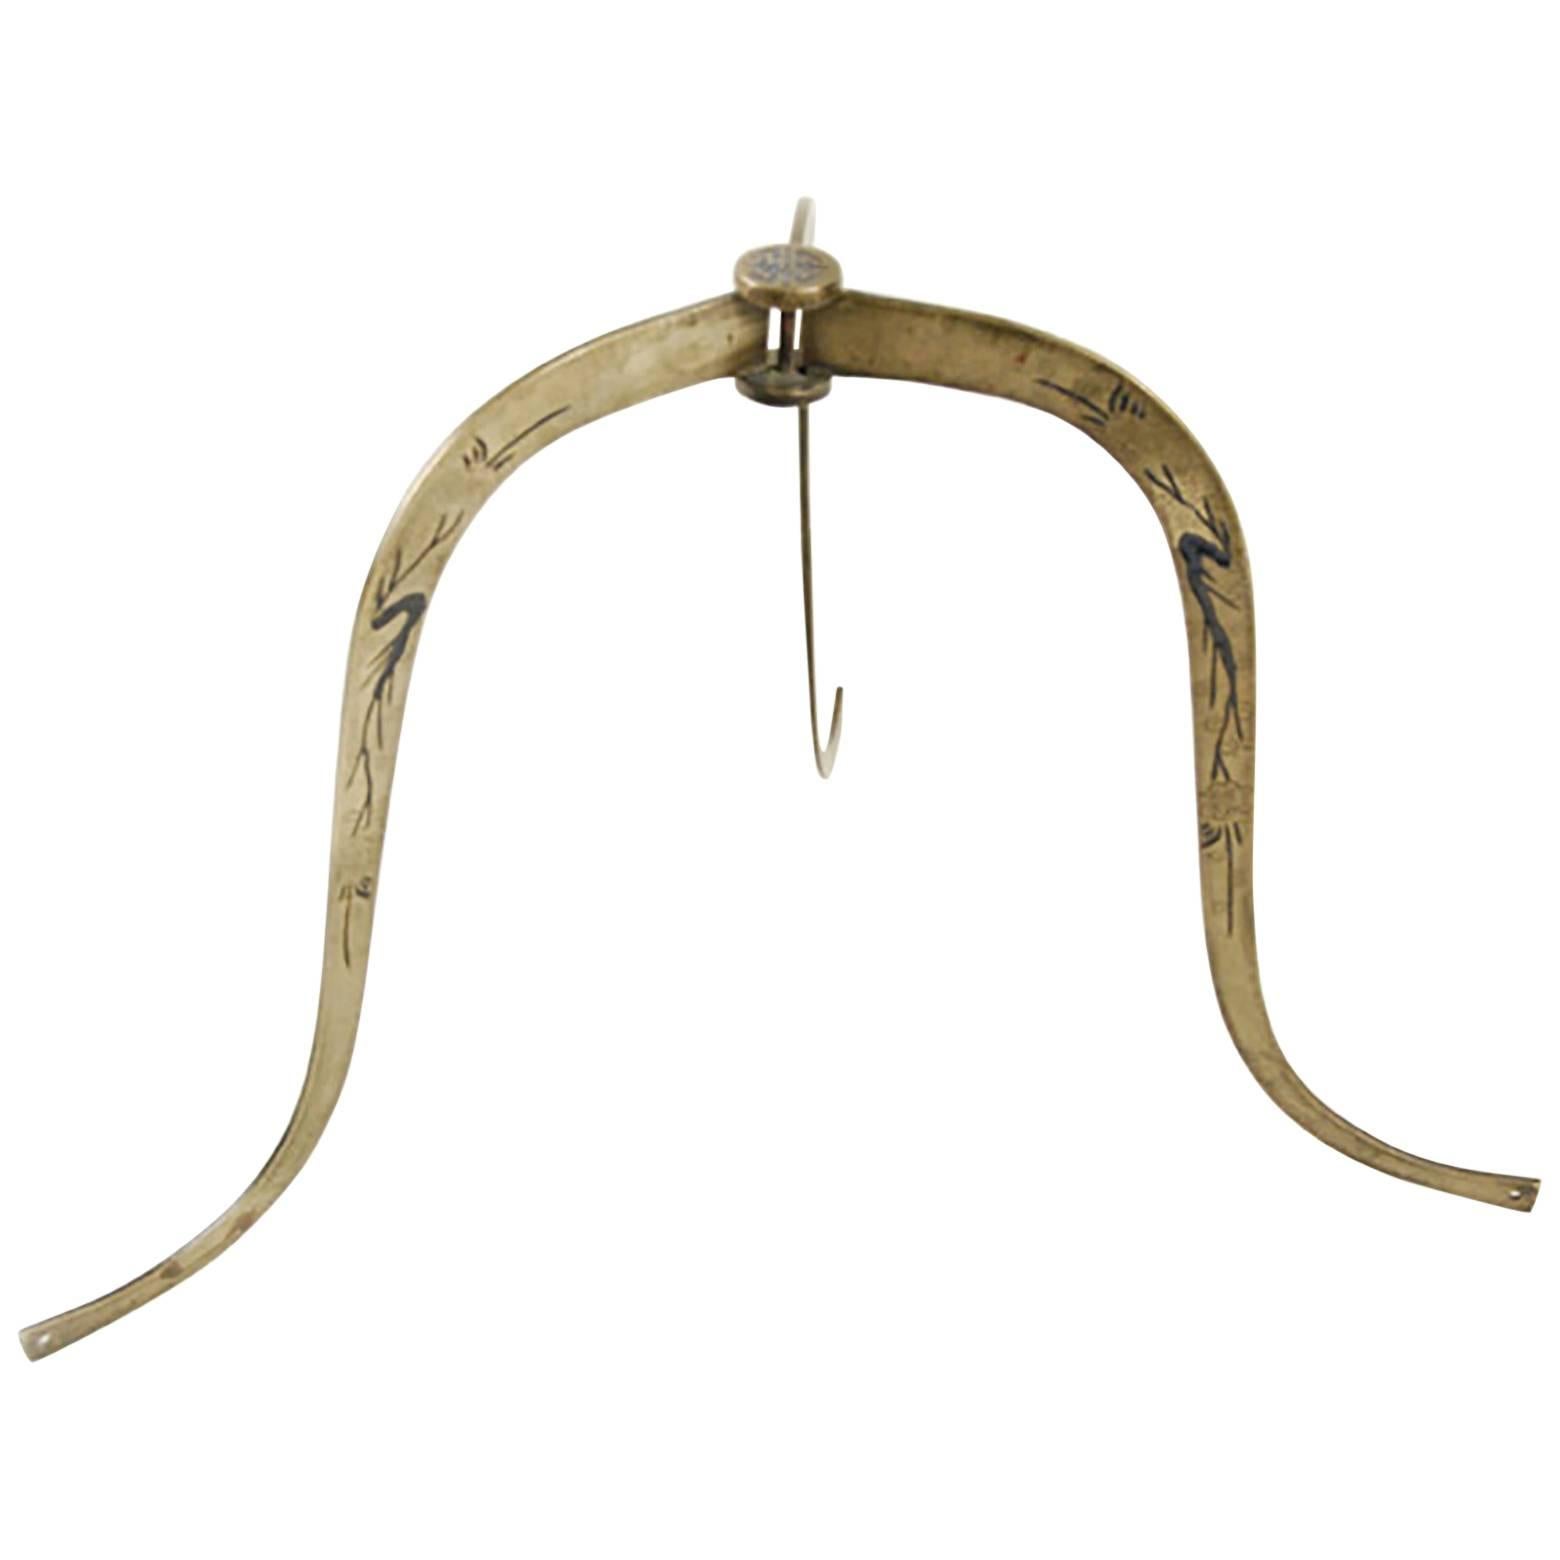 Chinese Etched Baitong Brass Hat Stand, c. 1850